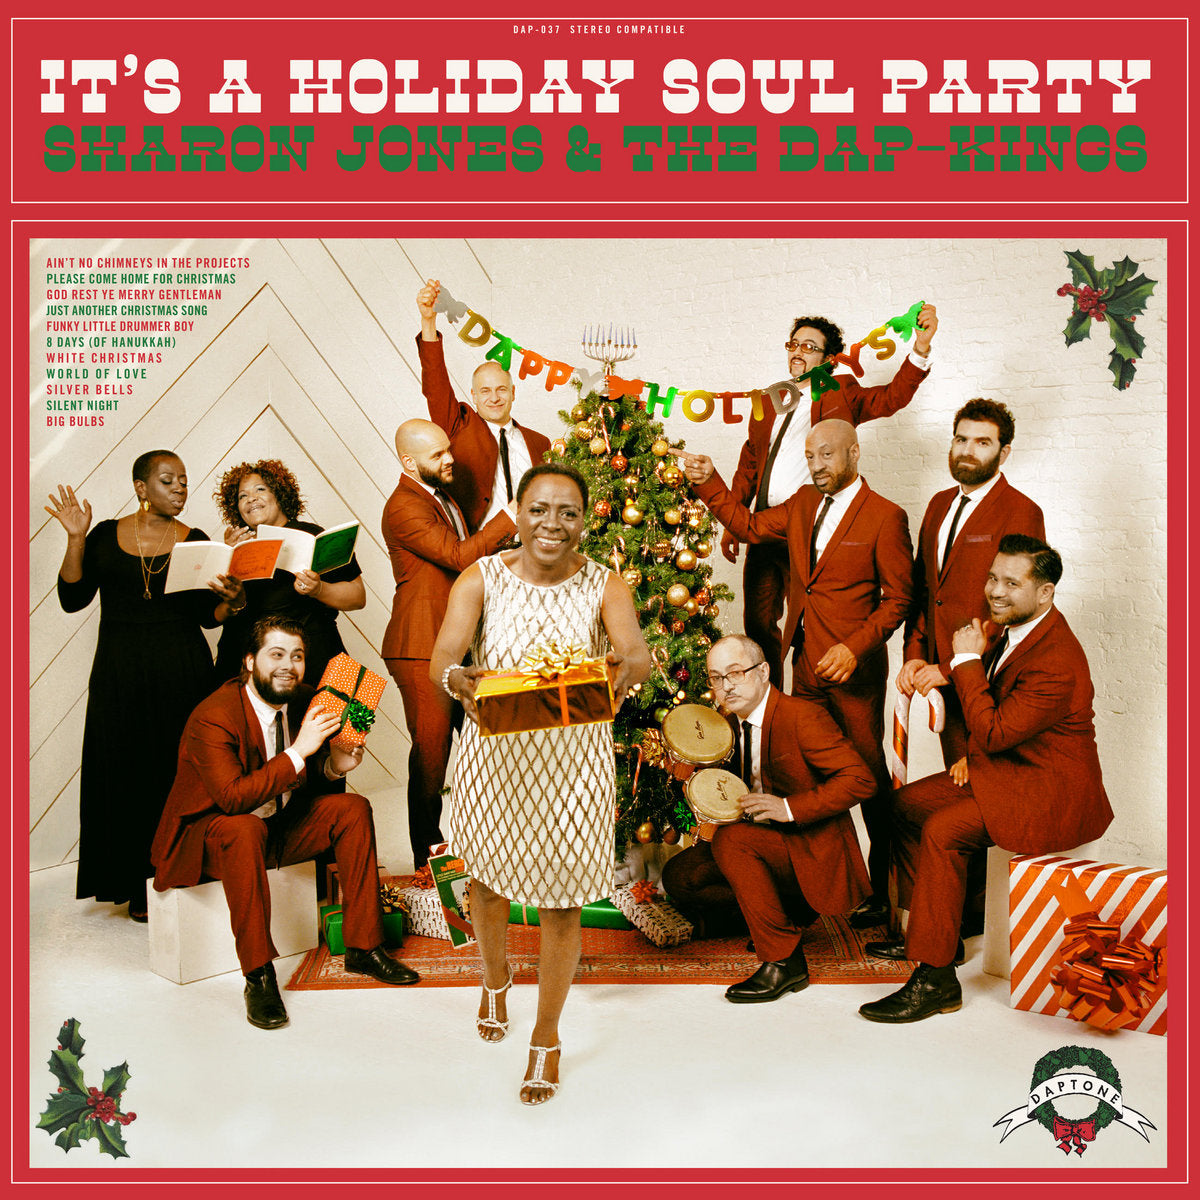 Sharon Jones & The Dap-Kings "It's a Holiday Soul Party" LP